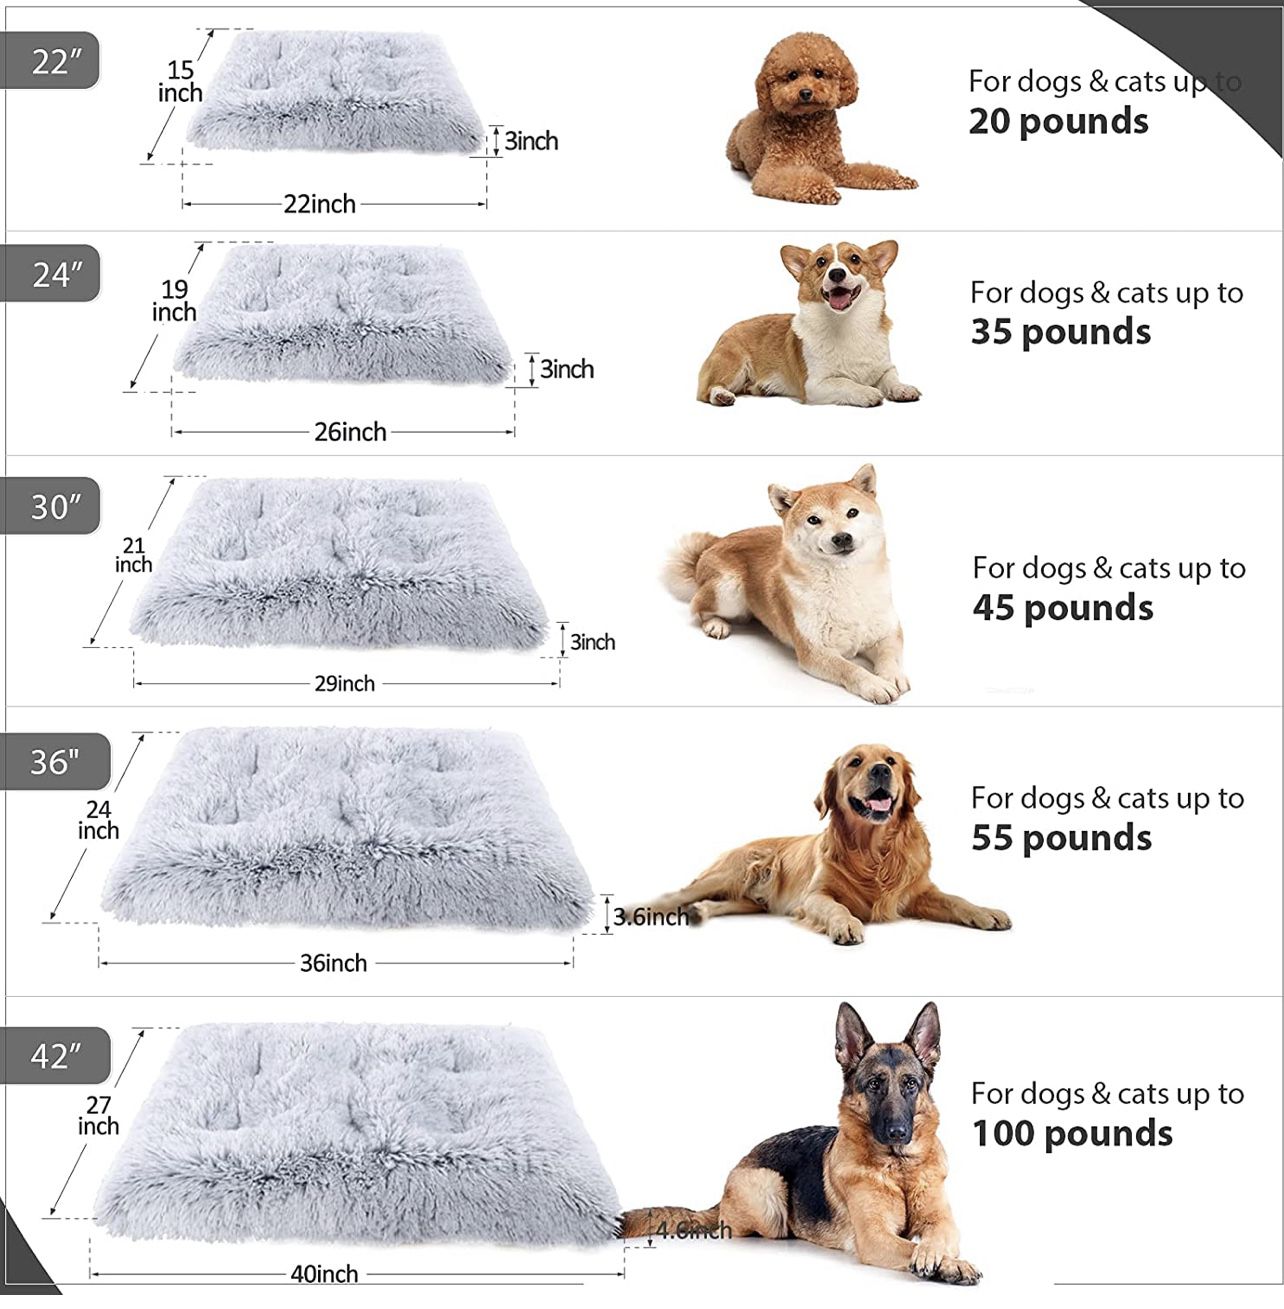 Vonabem Dog Bed Crate Pad, Deluxe Plush Soft Pet Beds, Washable Anti-Slip Dog Crate Bed for Large Medium Small Dogs and Cats,Dog Mats for Sleeping and